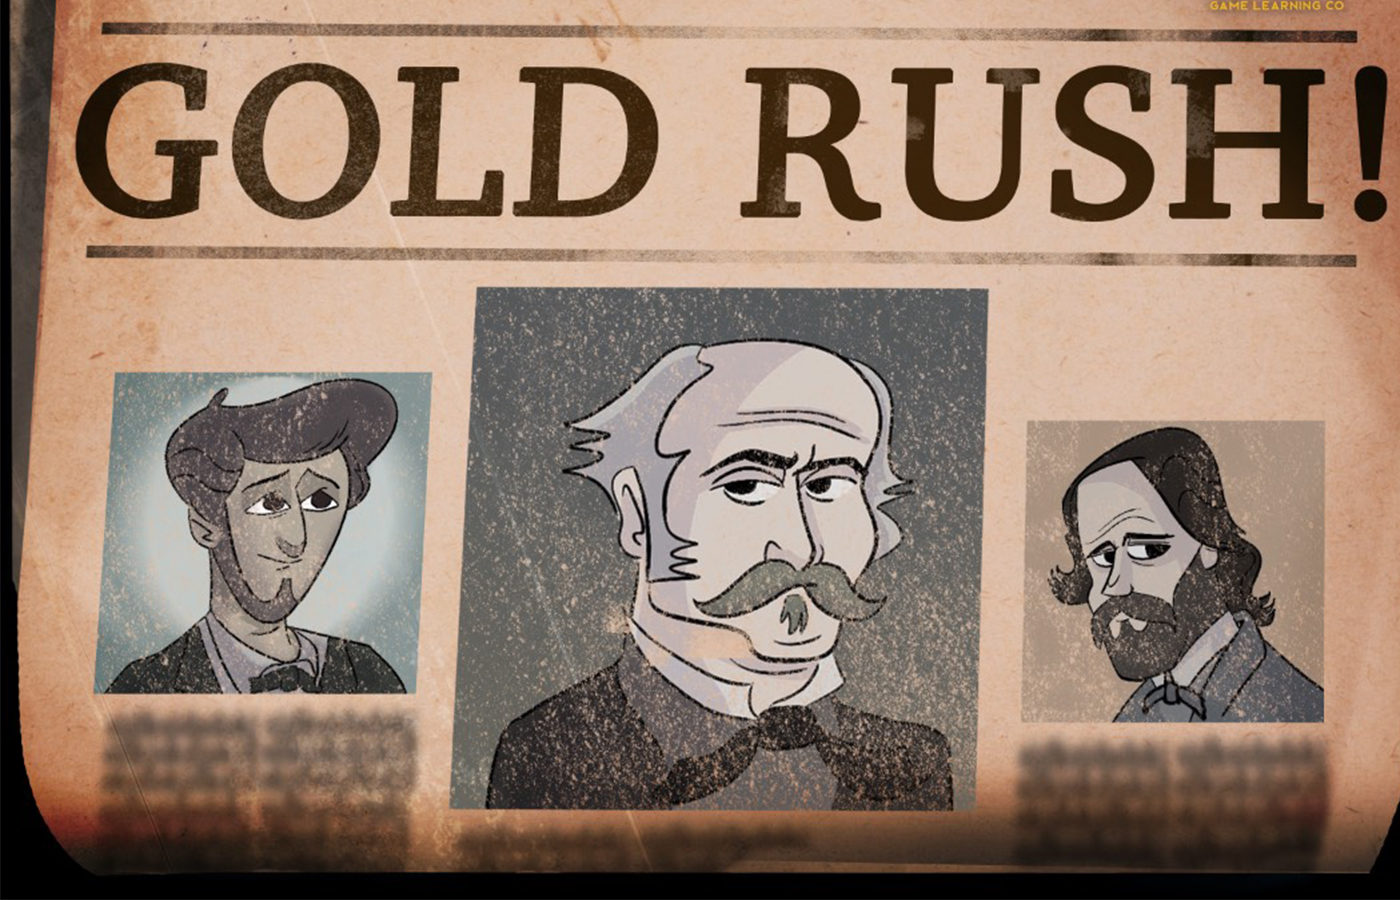 The Gold Rush, Game Learning’s Newest Educational Video Game